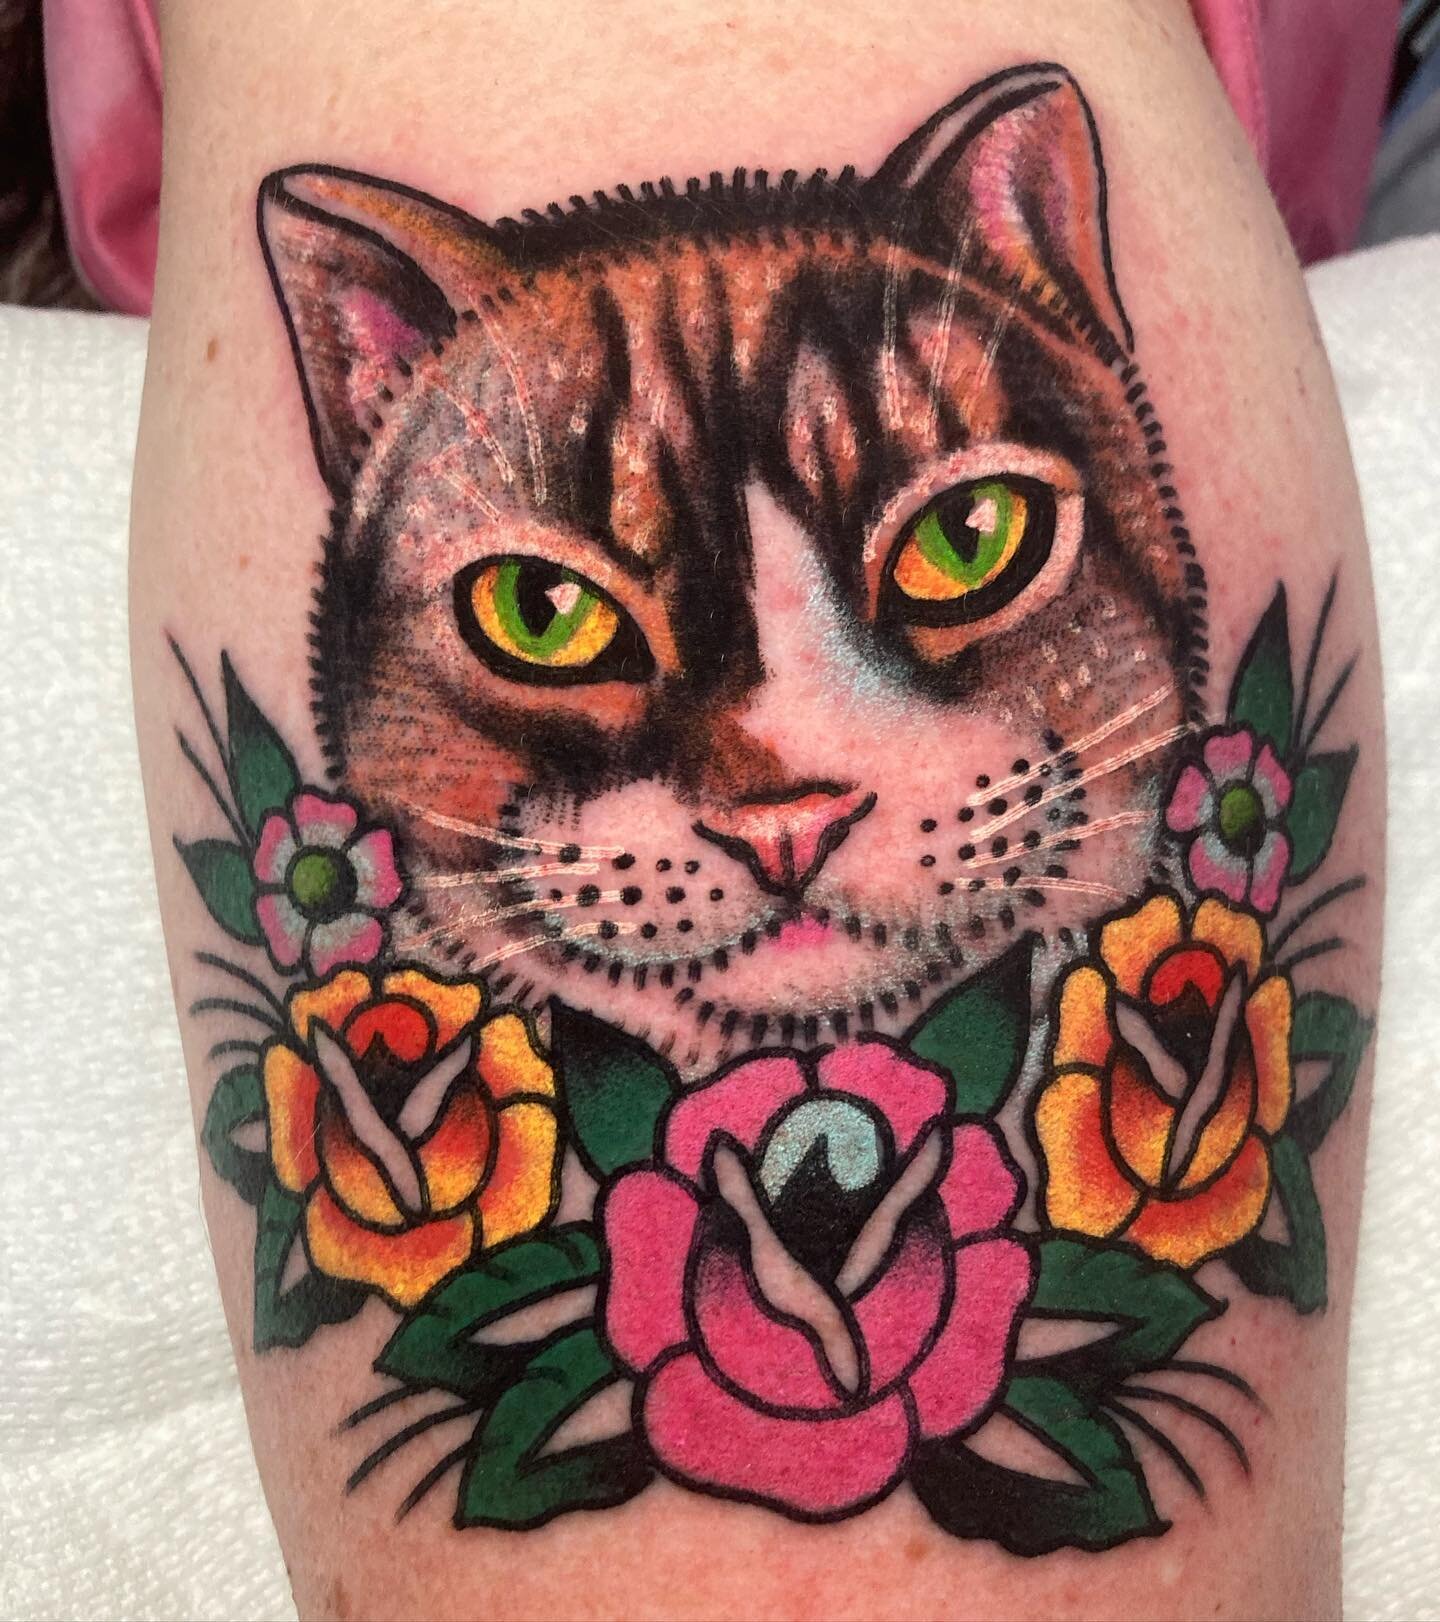 Tippy @hotlinetattoo 

**************************************
To get on my waitlist, click the link in my Bio. If you're looking for something small, or a walk-in tattoo, feel free to call the shop at
508-827-7911 to see if I'm available!
***********